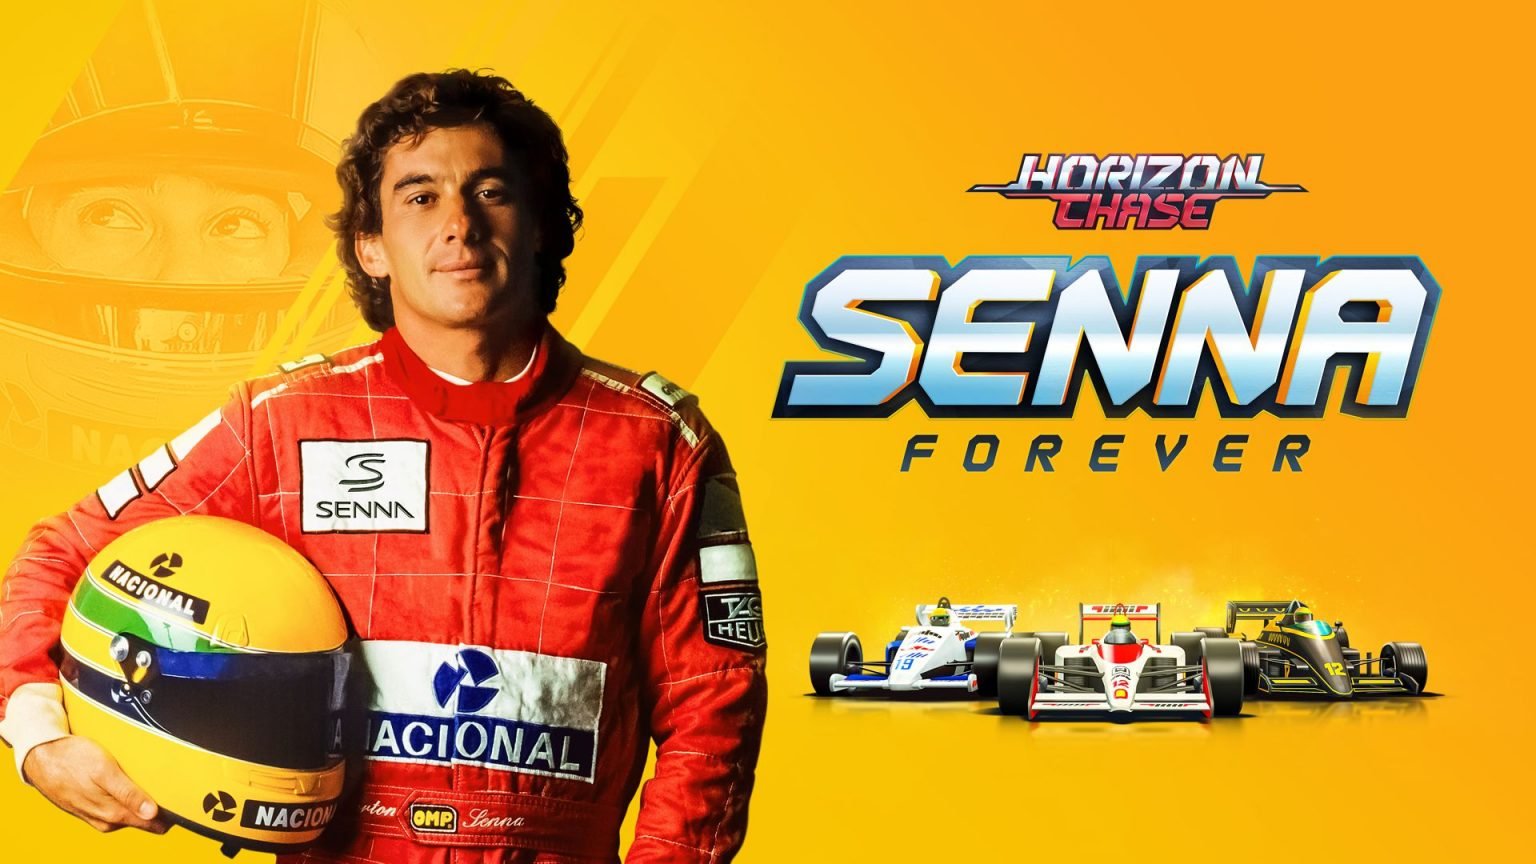 The Senna Forever Expansion Is Live For Horizon Chase thumbnail